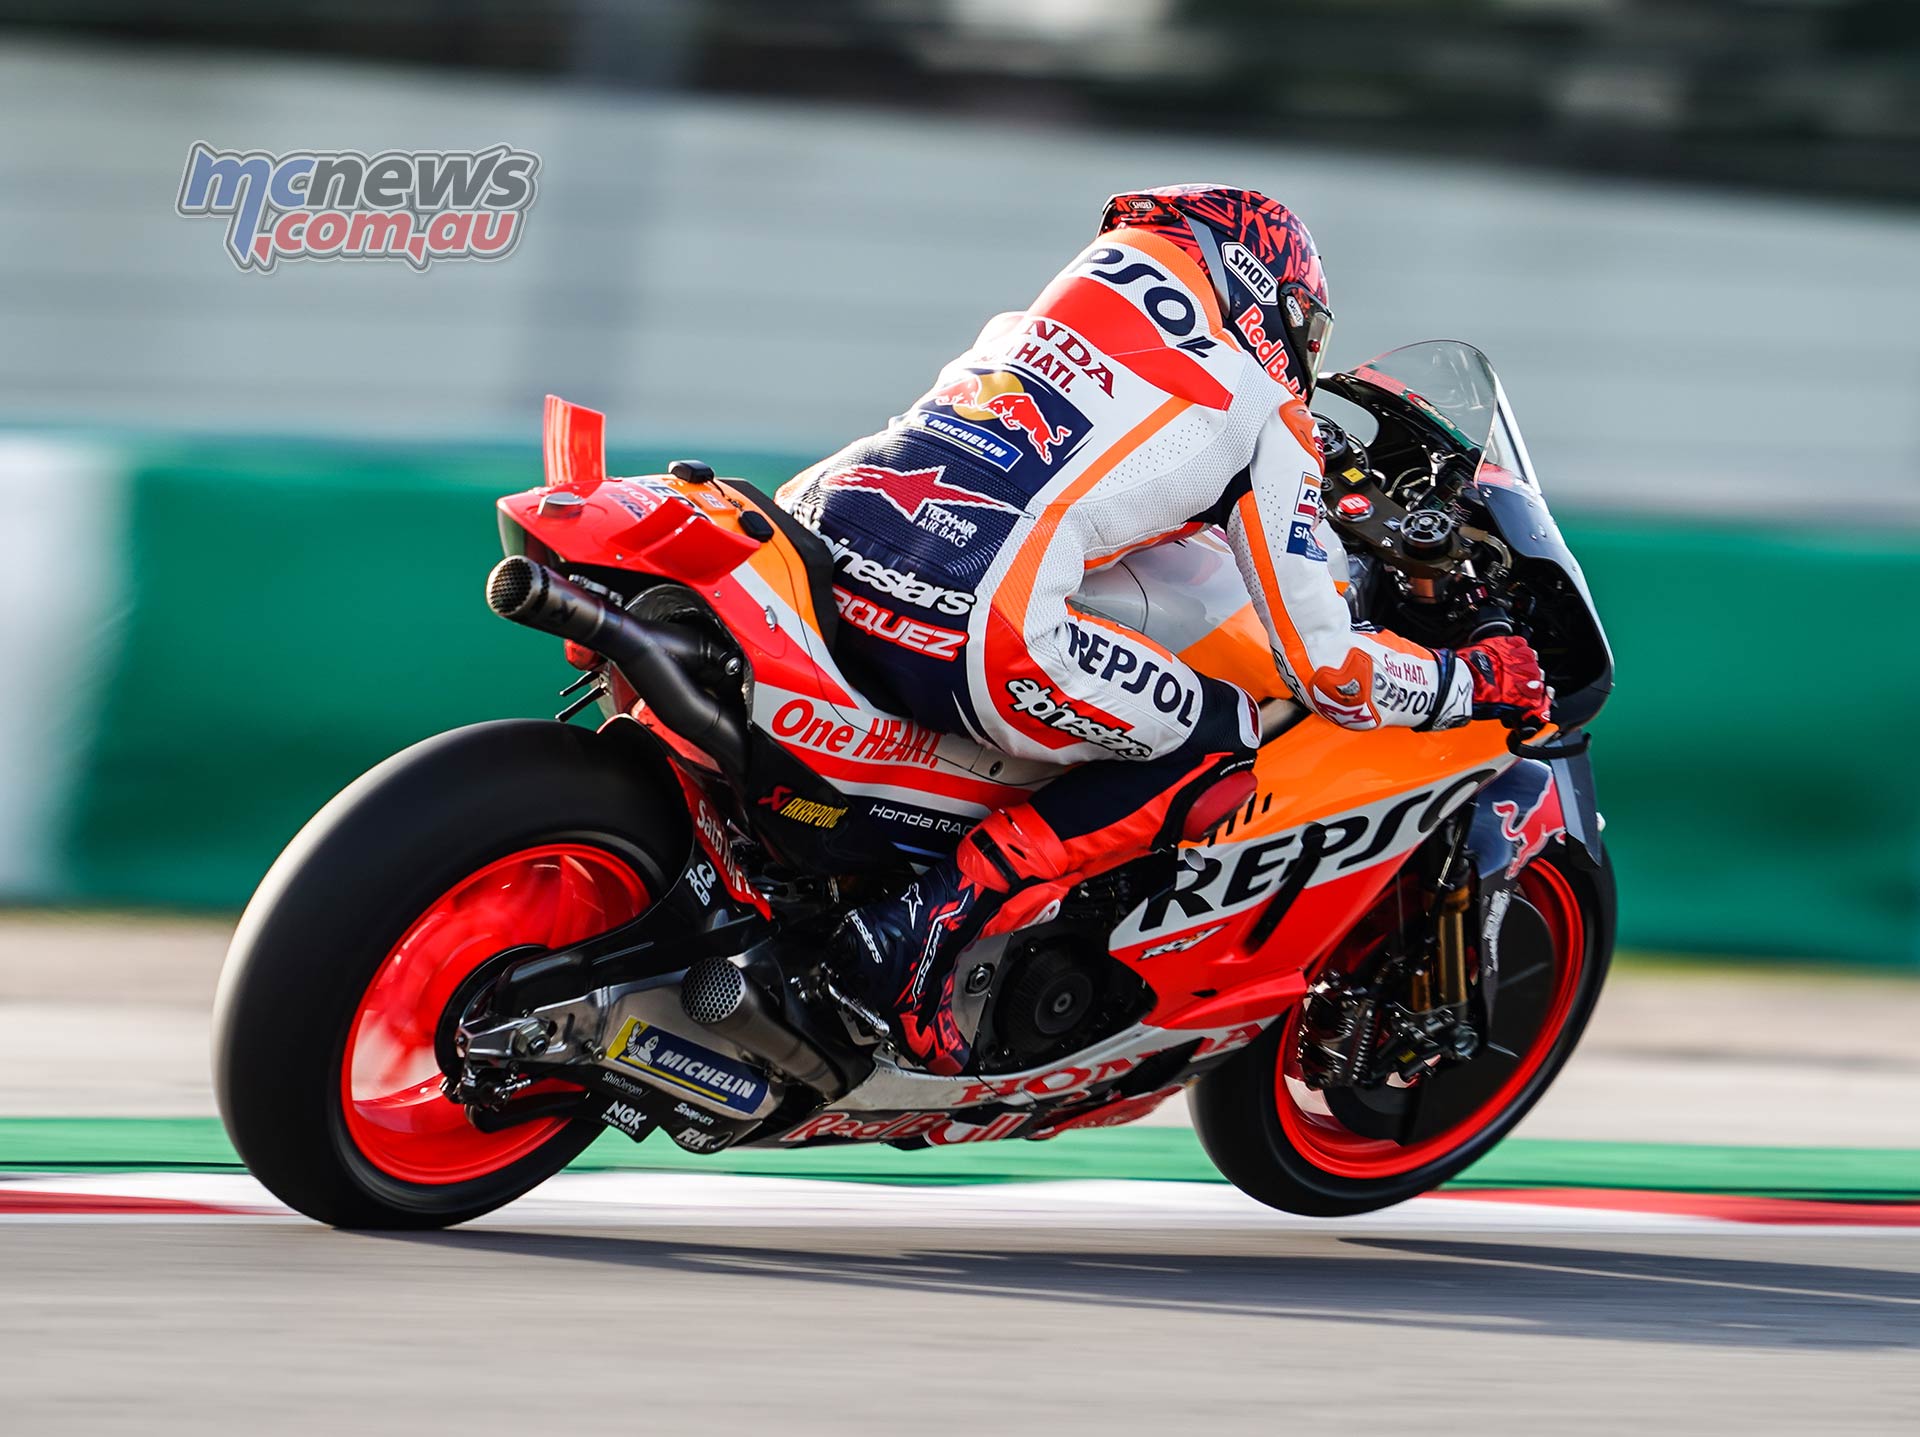 Marc Marquez - right now we cannot think about a podium or victory